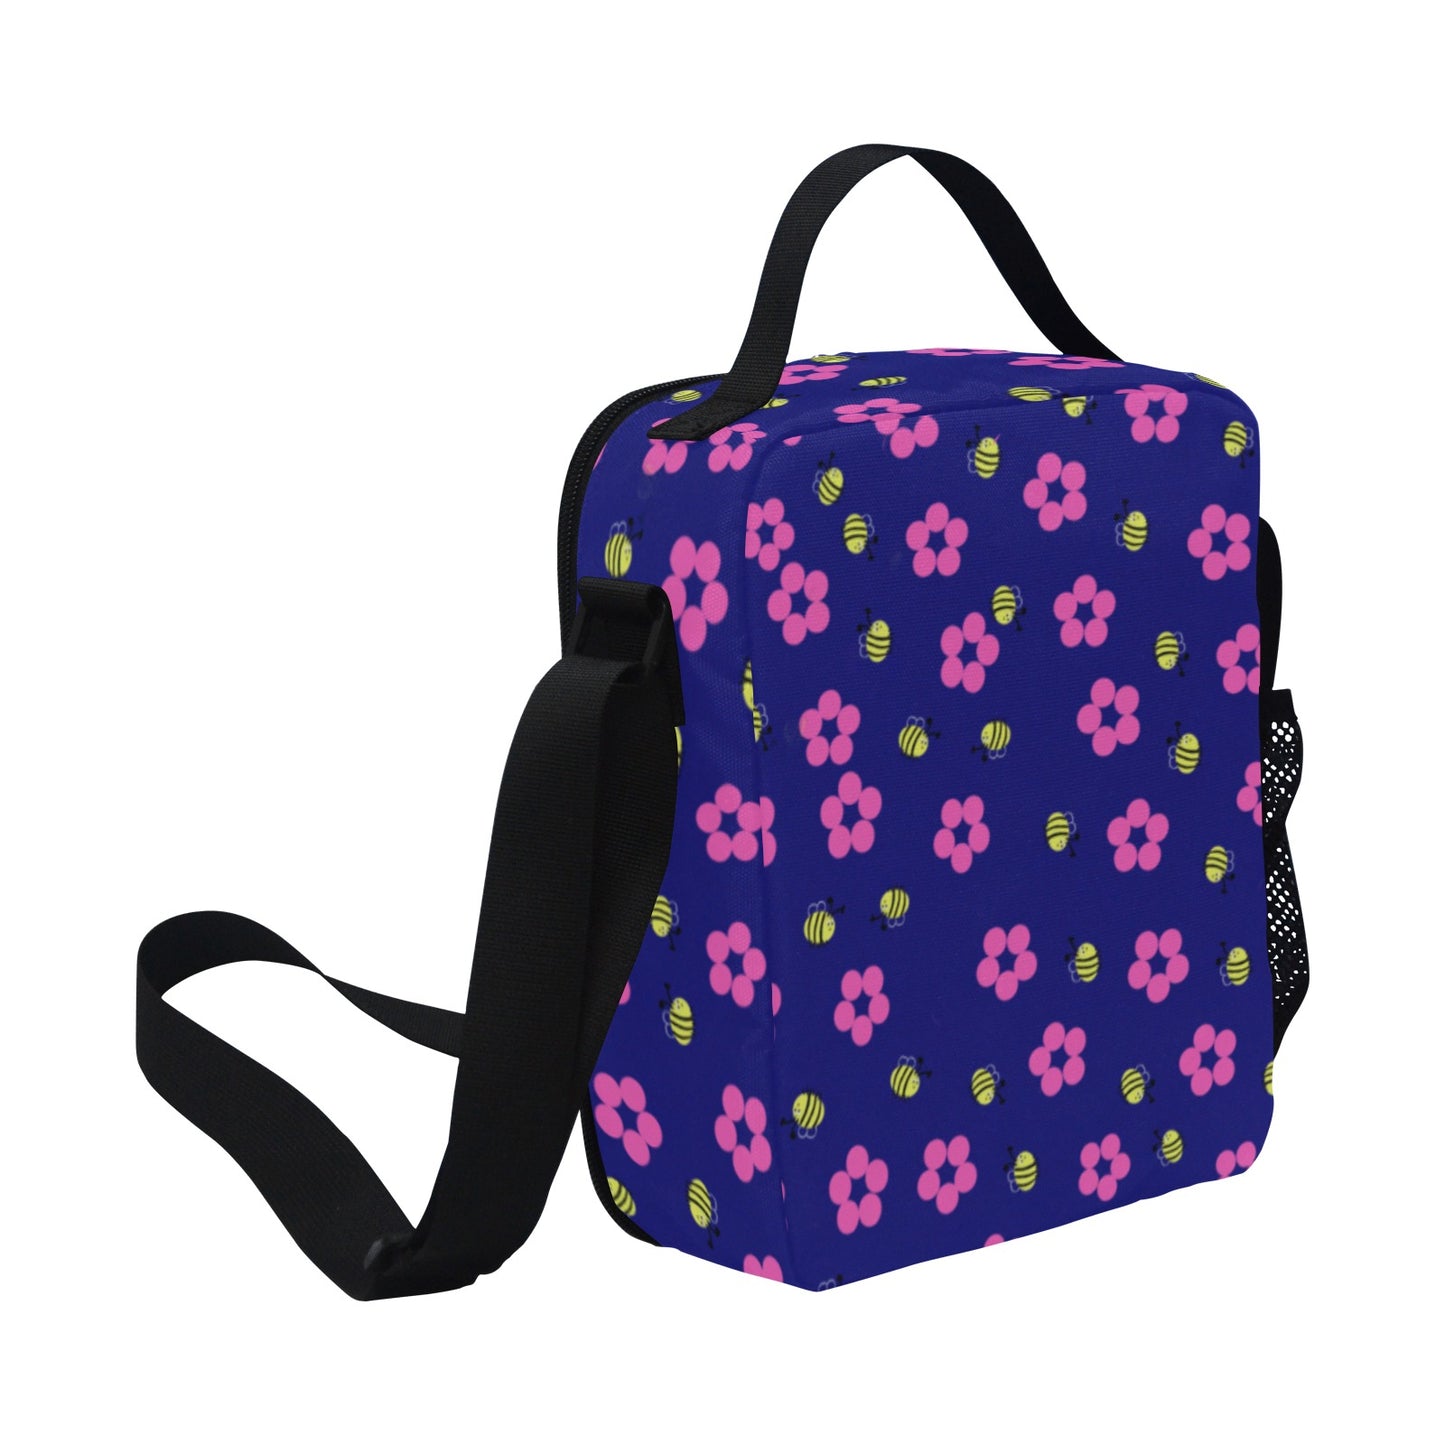 Flower and Bee Lunch Bag